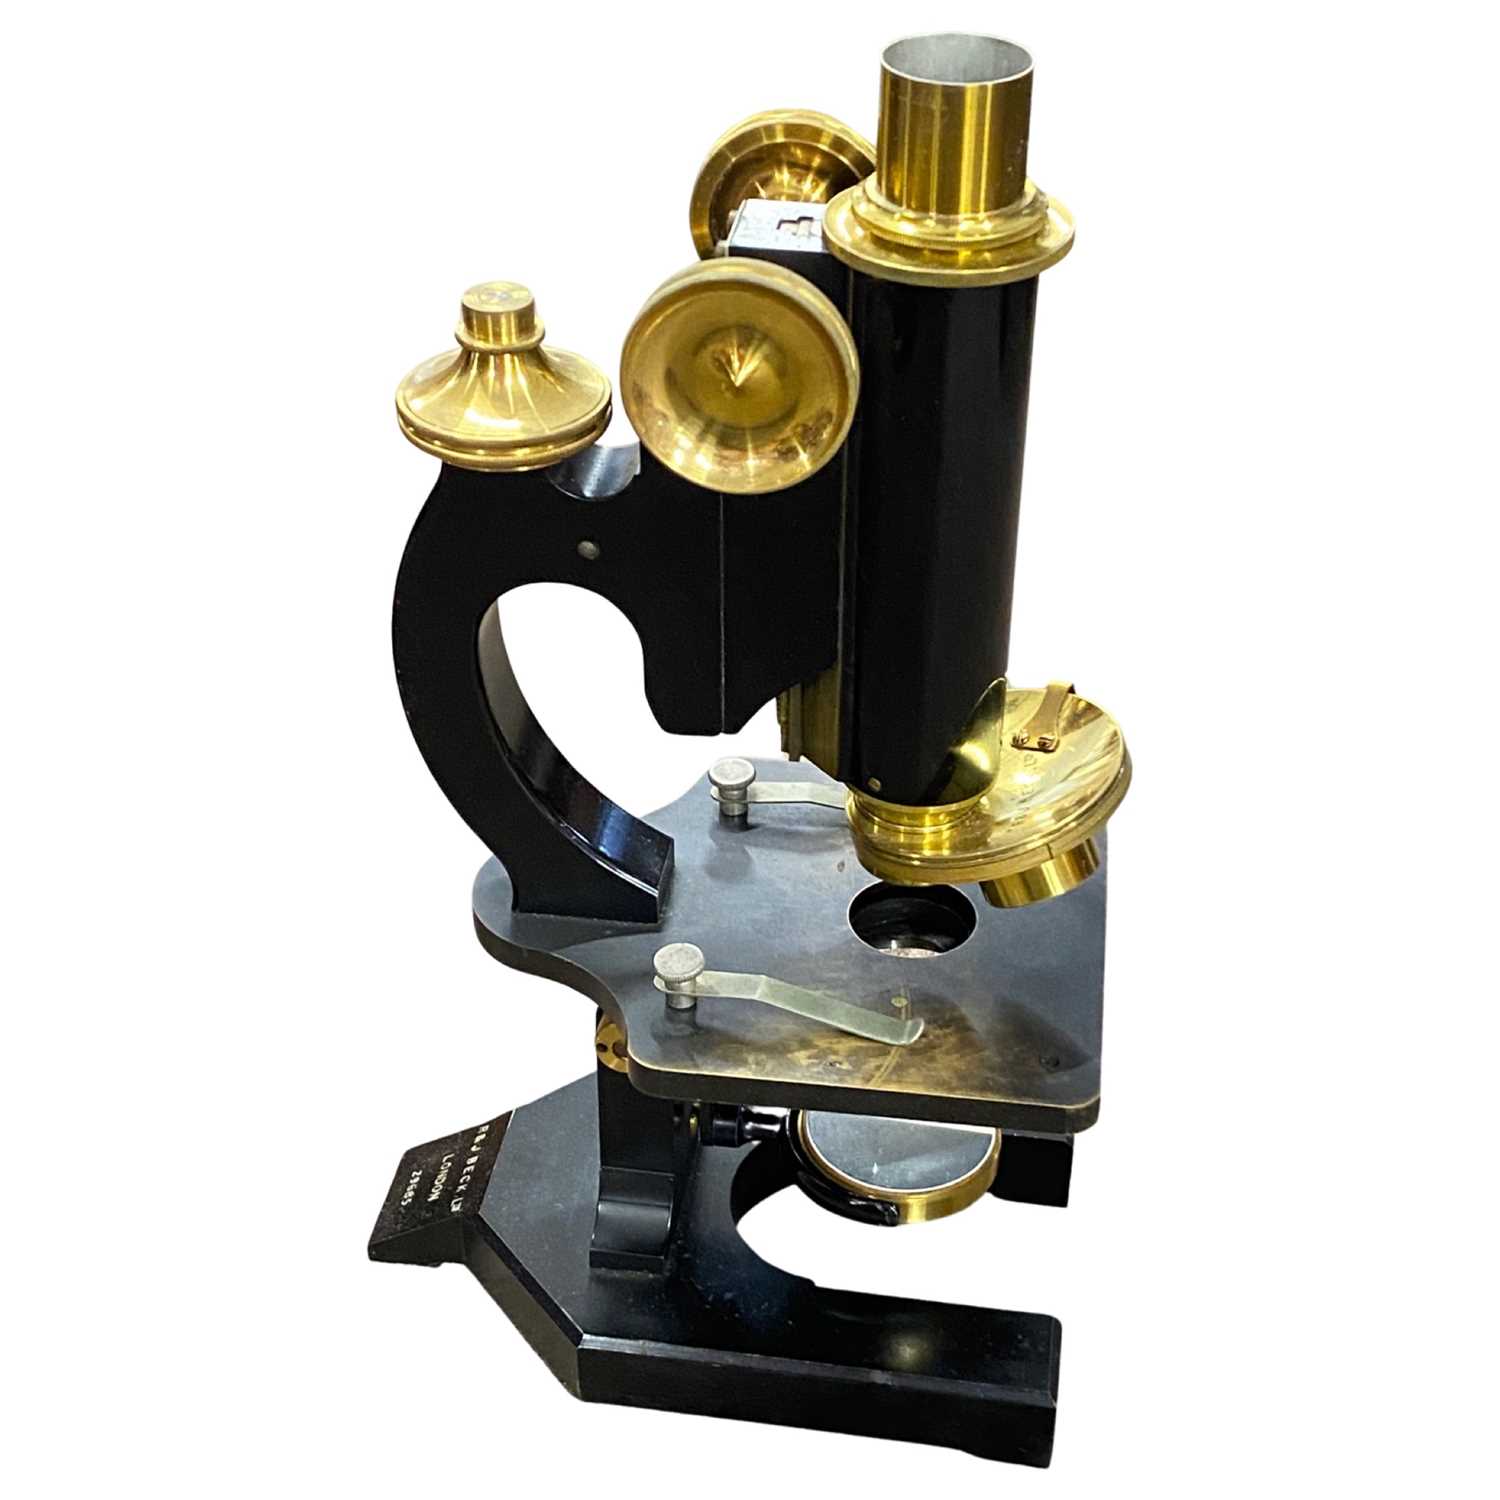 R & J Beck Ltd, London, a brass and black lacquered adjustable monocular microscope numbered 29685 - Image 2 of 2